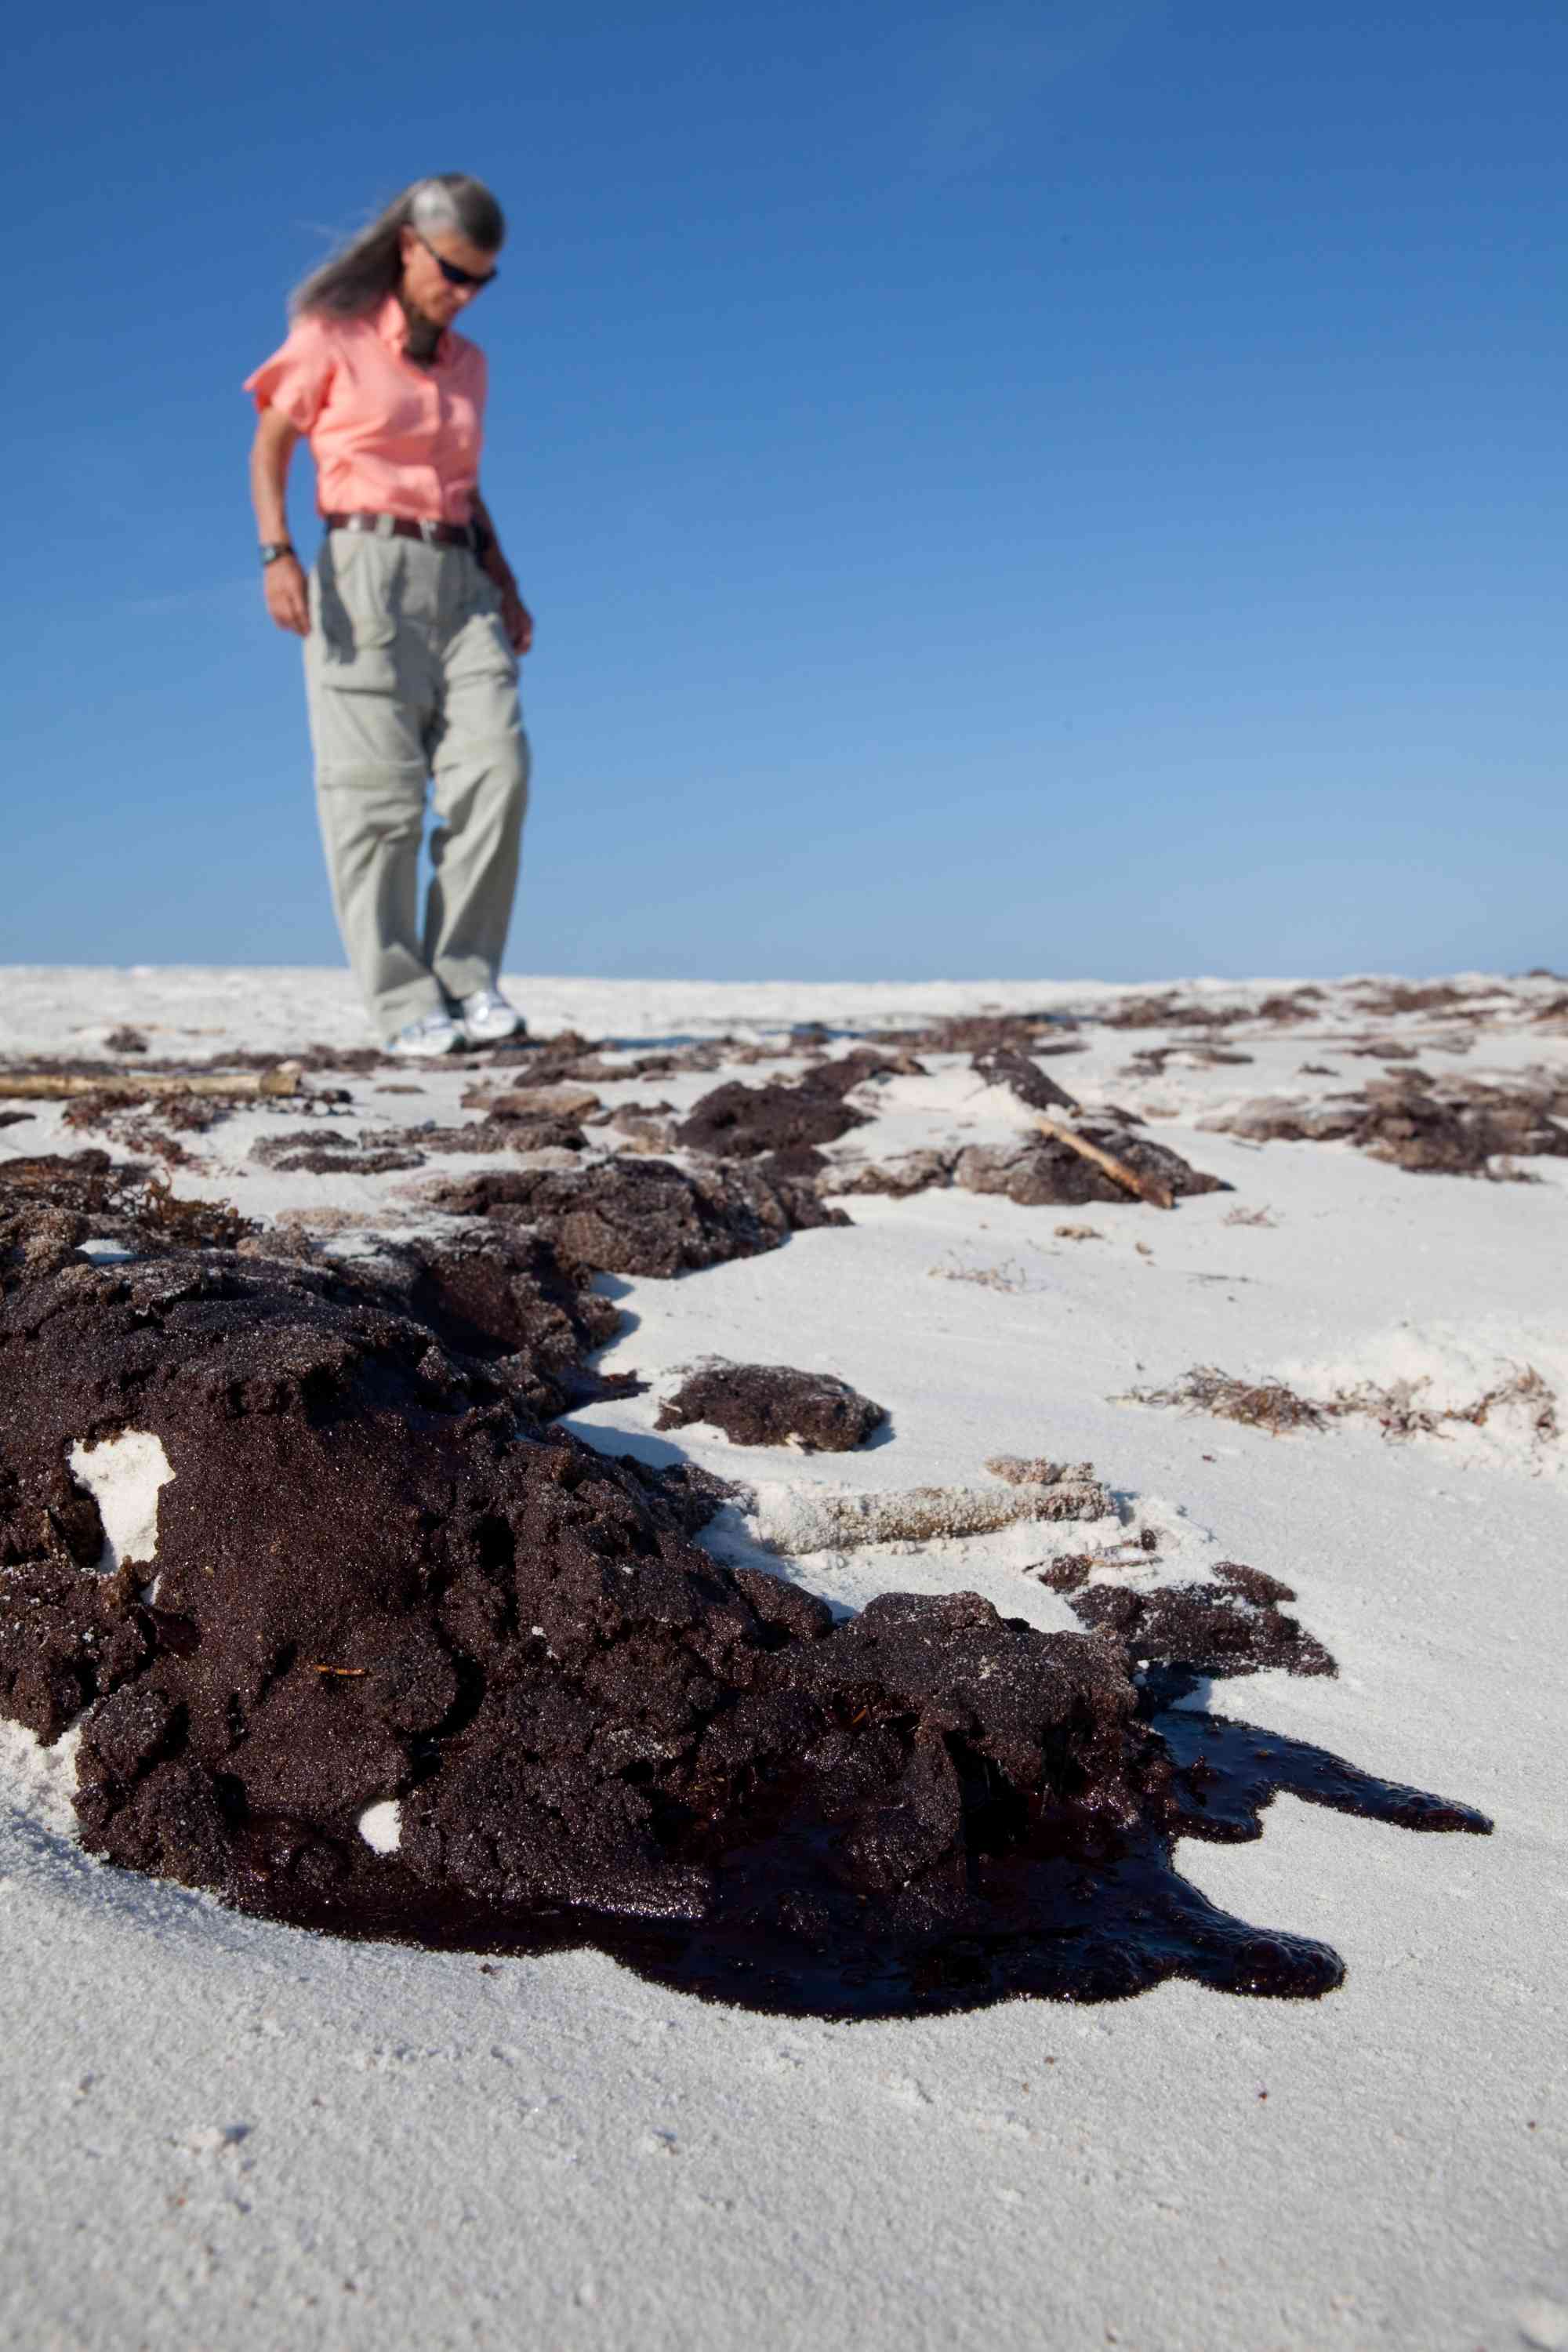 Jamie Rappaport Clark on the beach in the Gulf after the BP oil spill looking at washed up oil